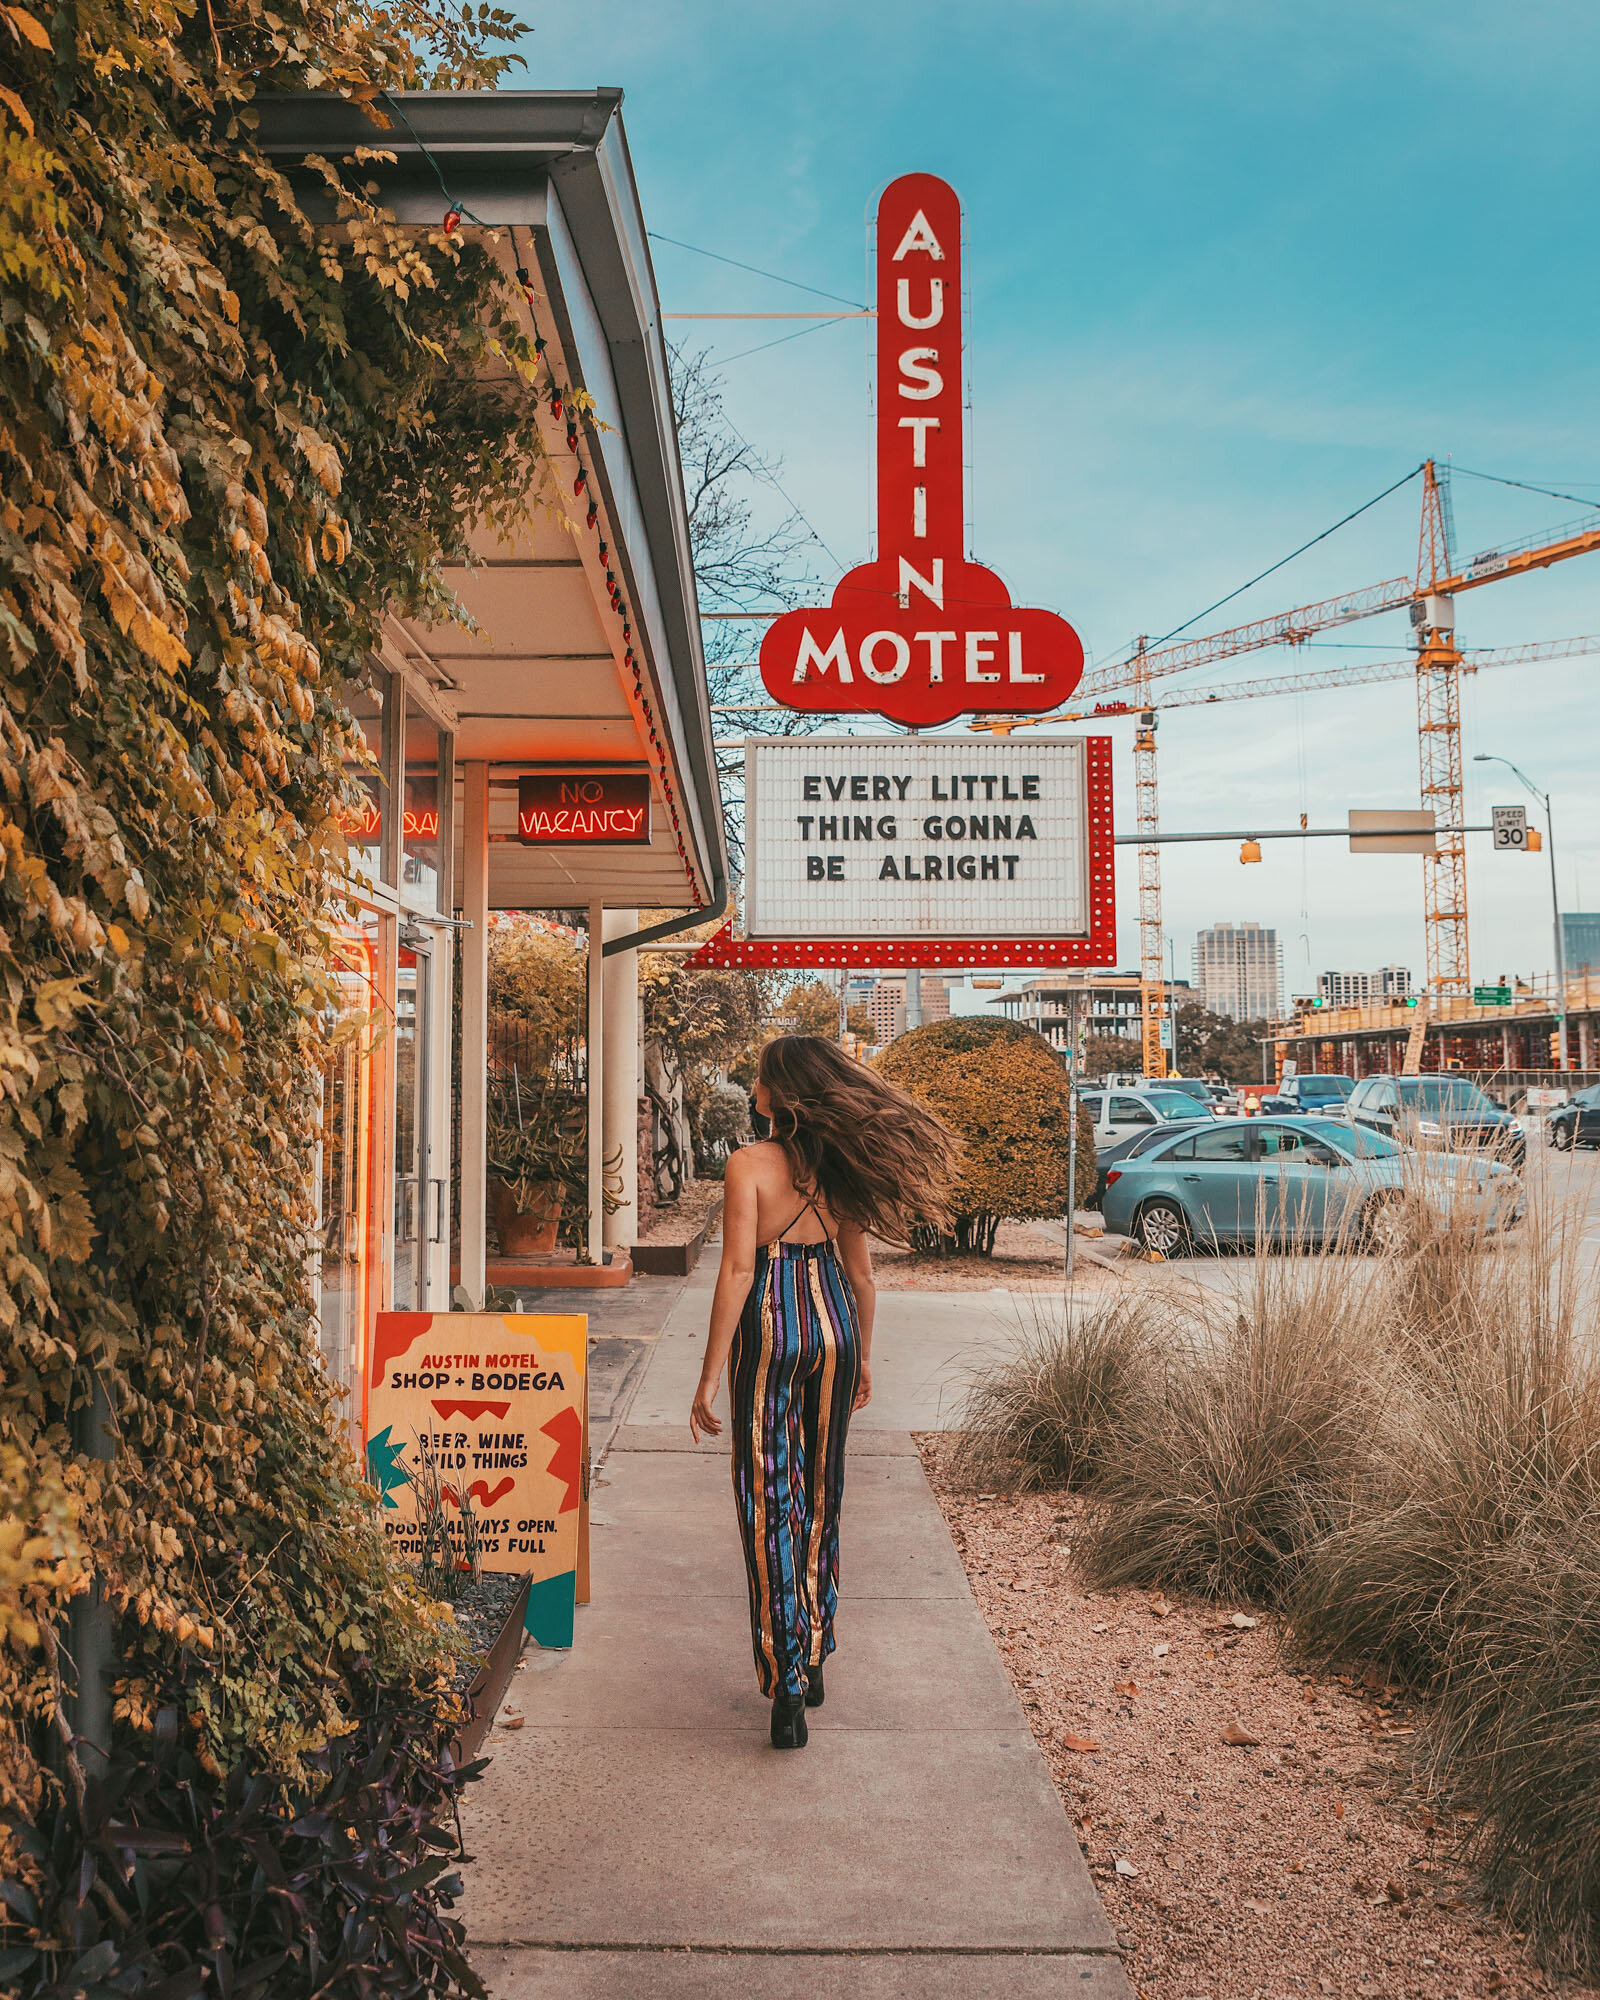 Austin Motel on South Congress | Austin hotels | Where to stay in Austin, Texas | SoCo | Downtown ATX